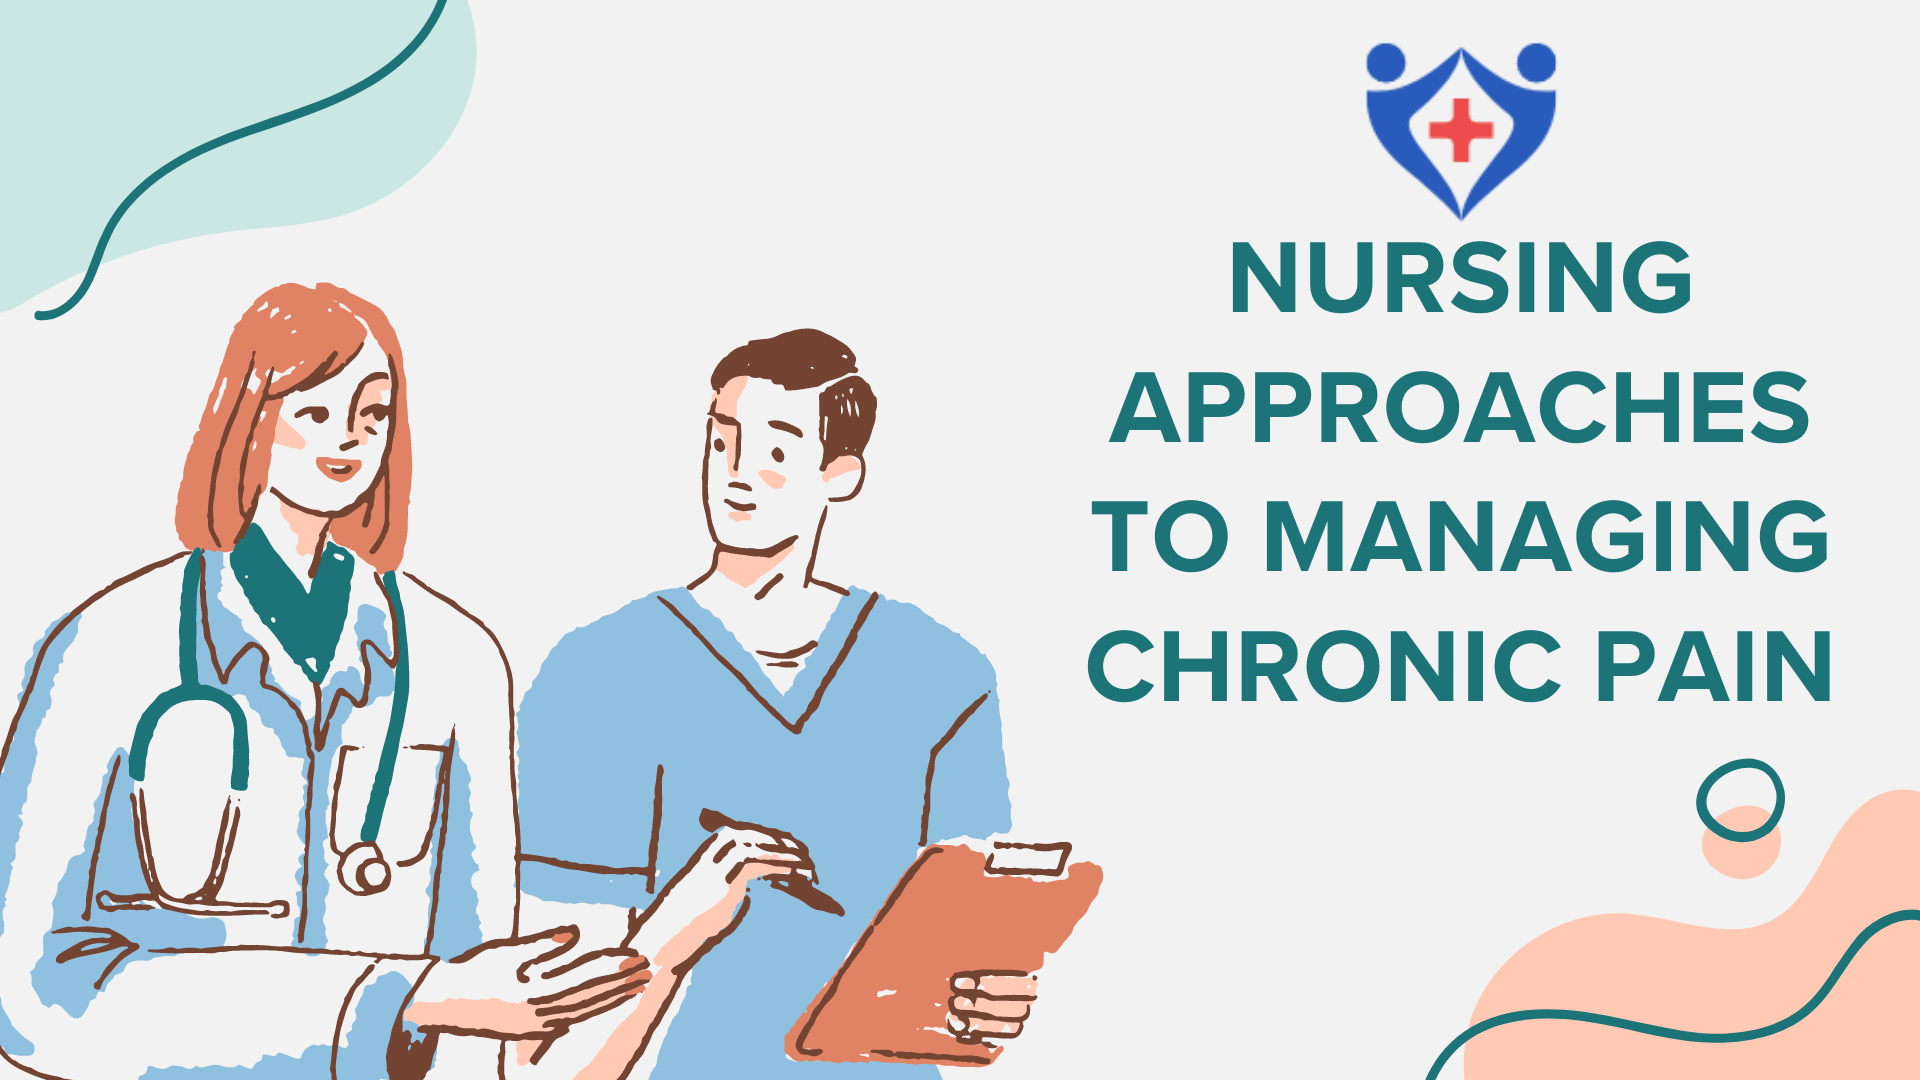 Nursing Approaches to Managing Chronic Pain